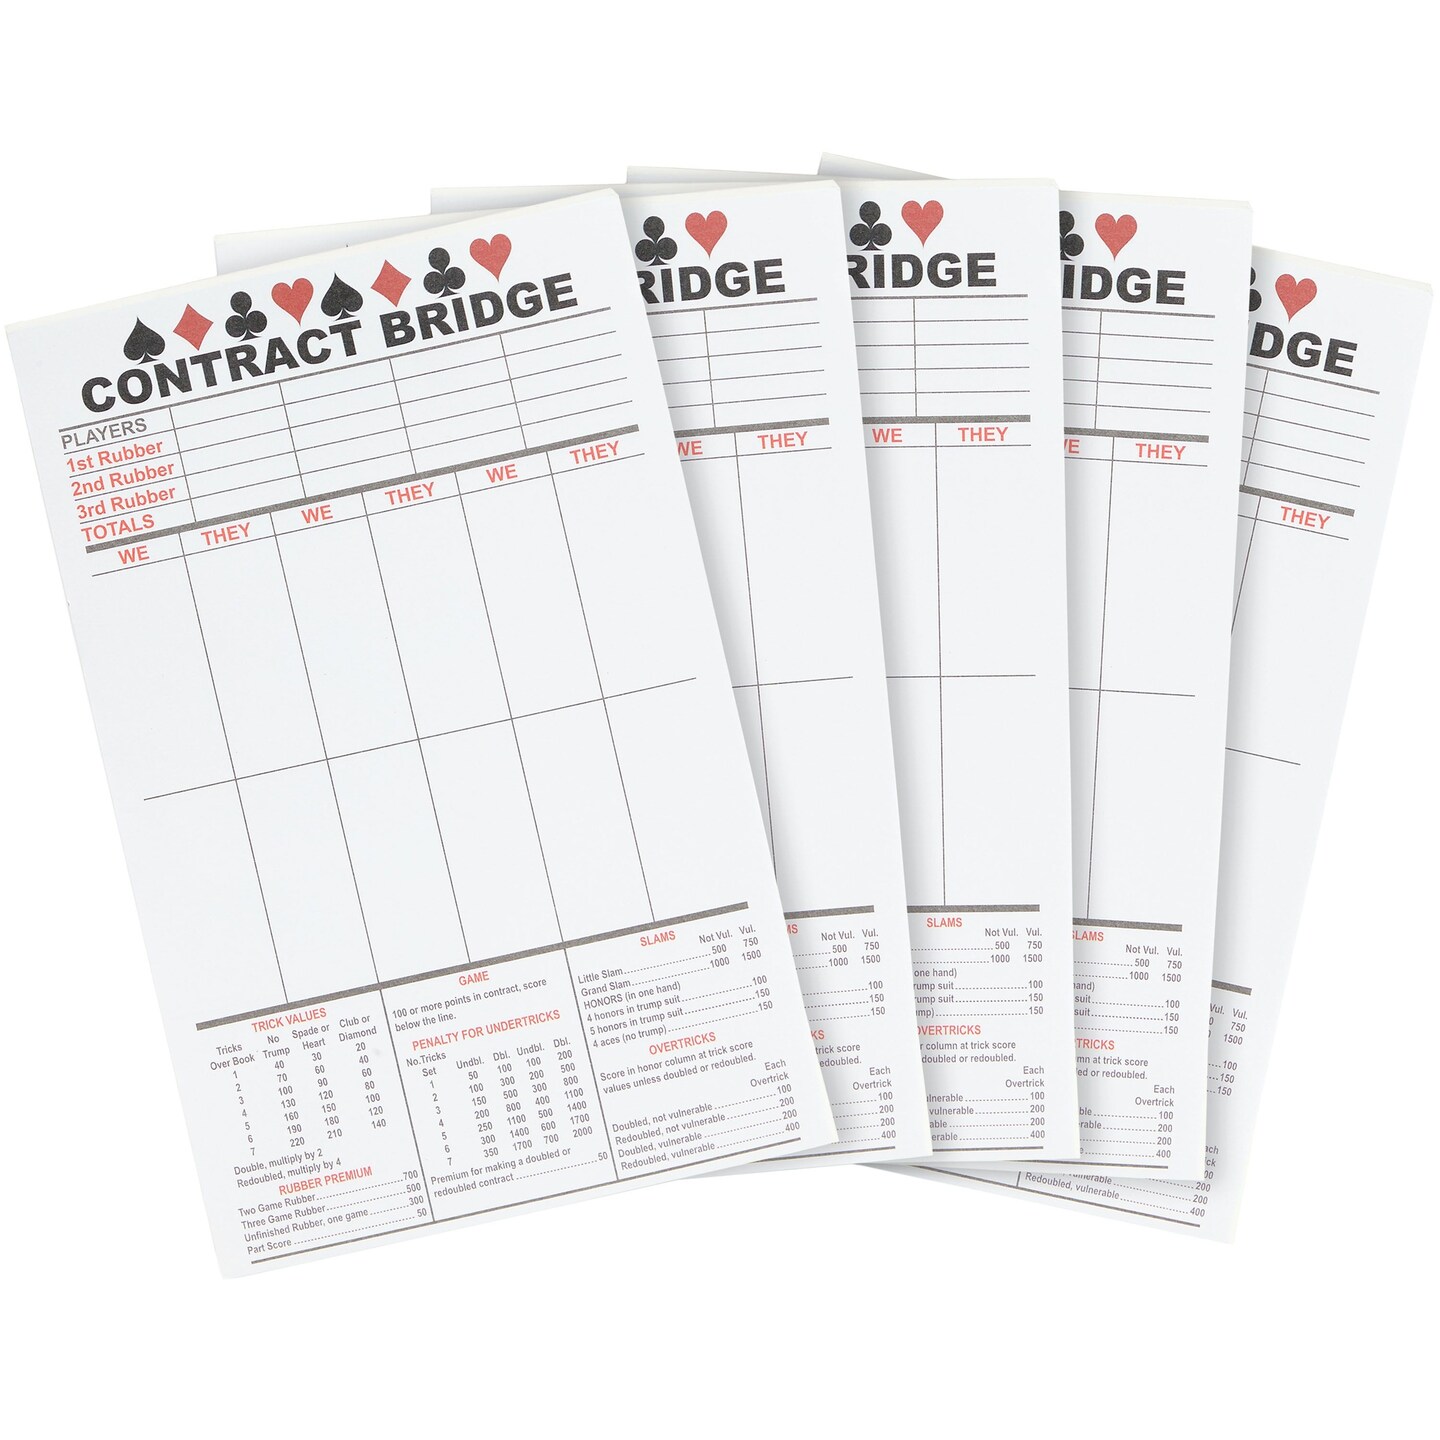 250 Sheets Contract Bridge Score Pads and Tallies, Game Scoring Cards Supplies, Large Print with Trick Values (5 Notepads)